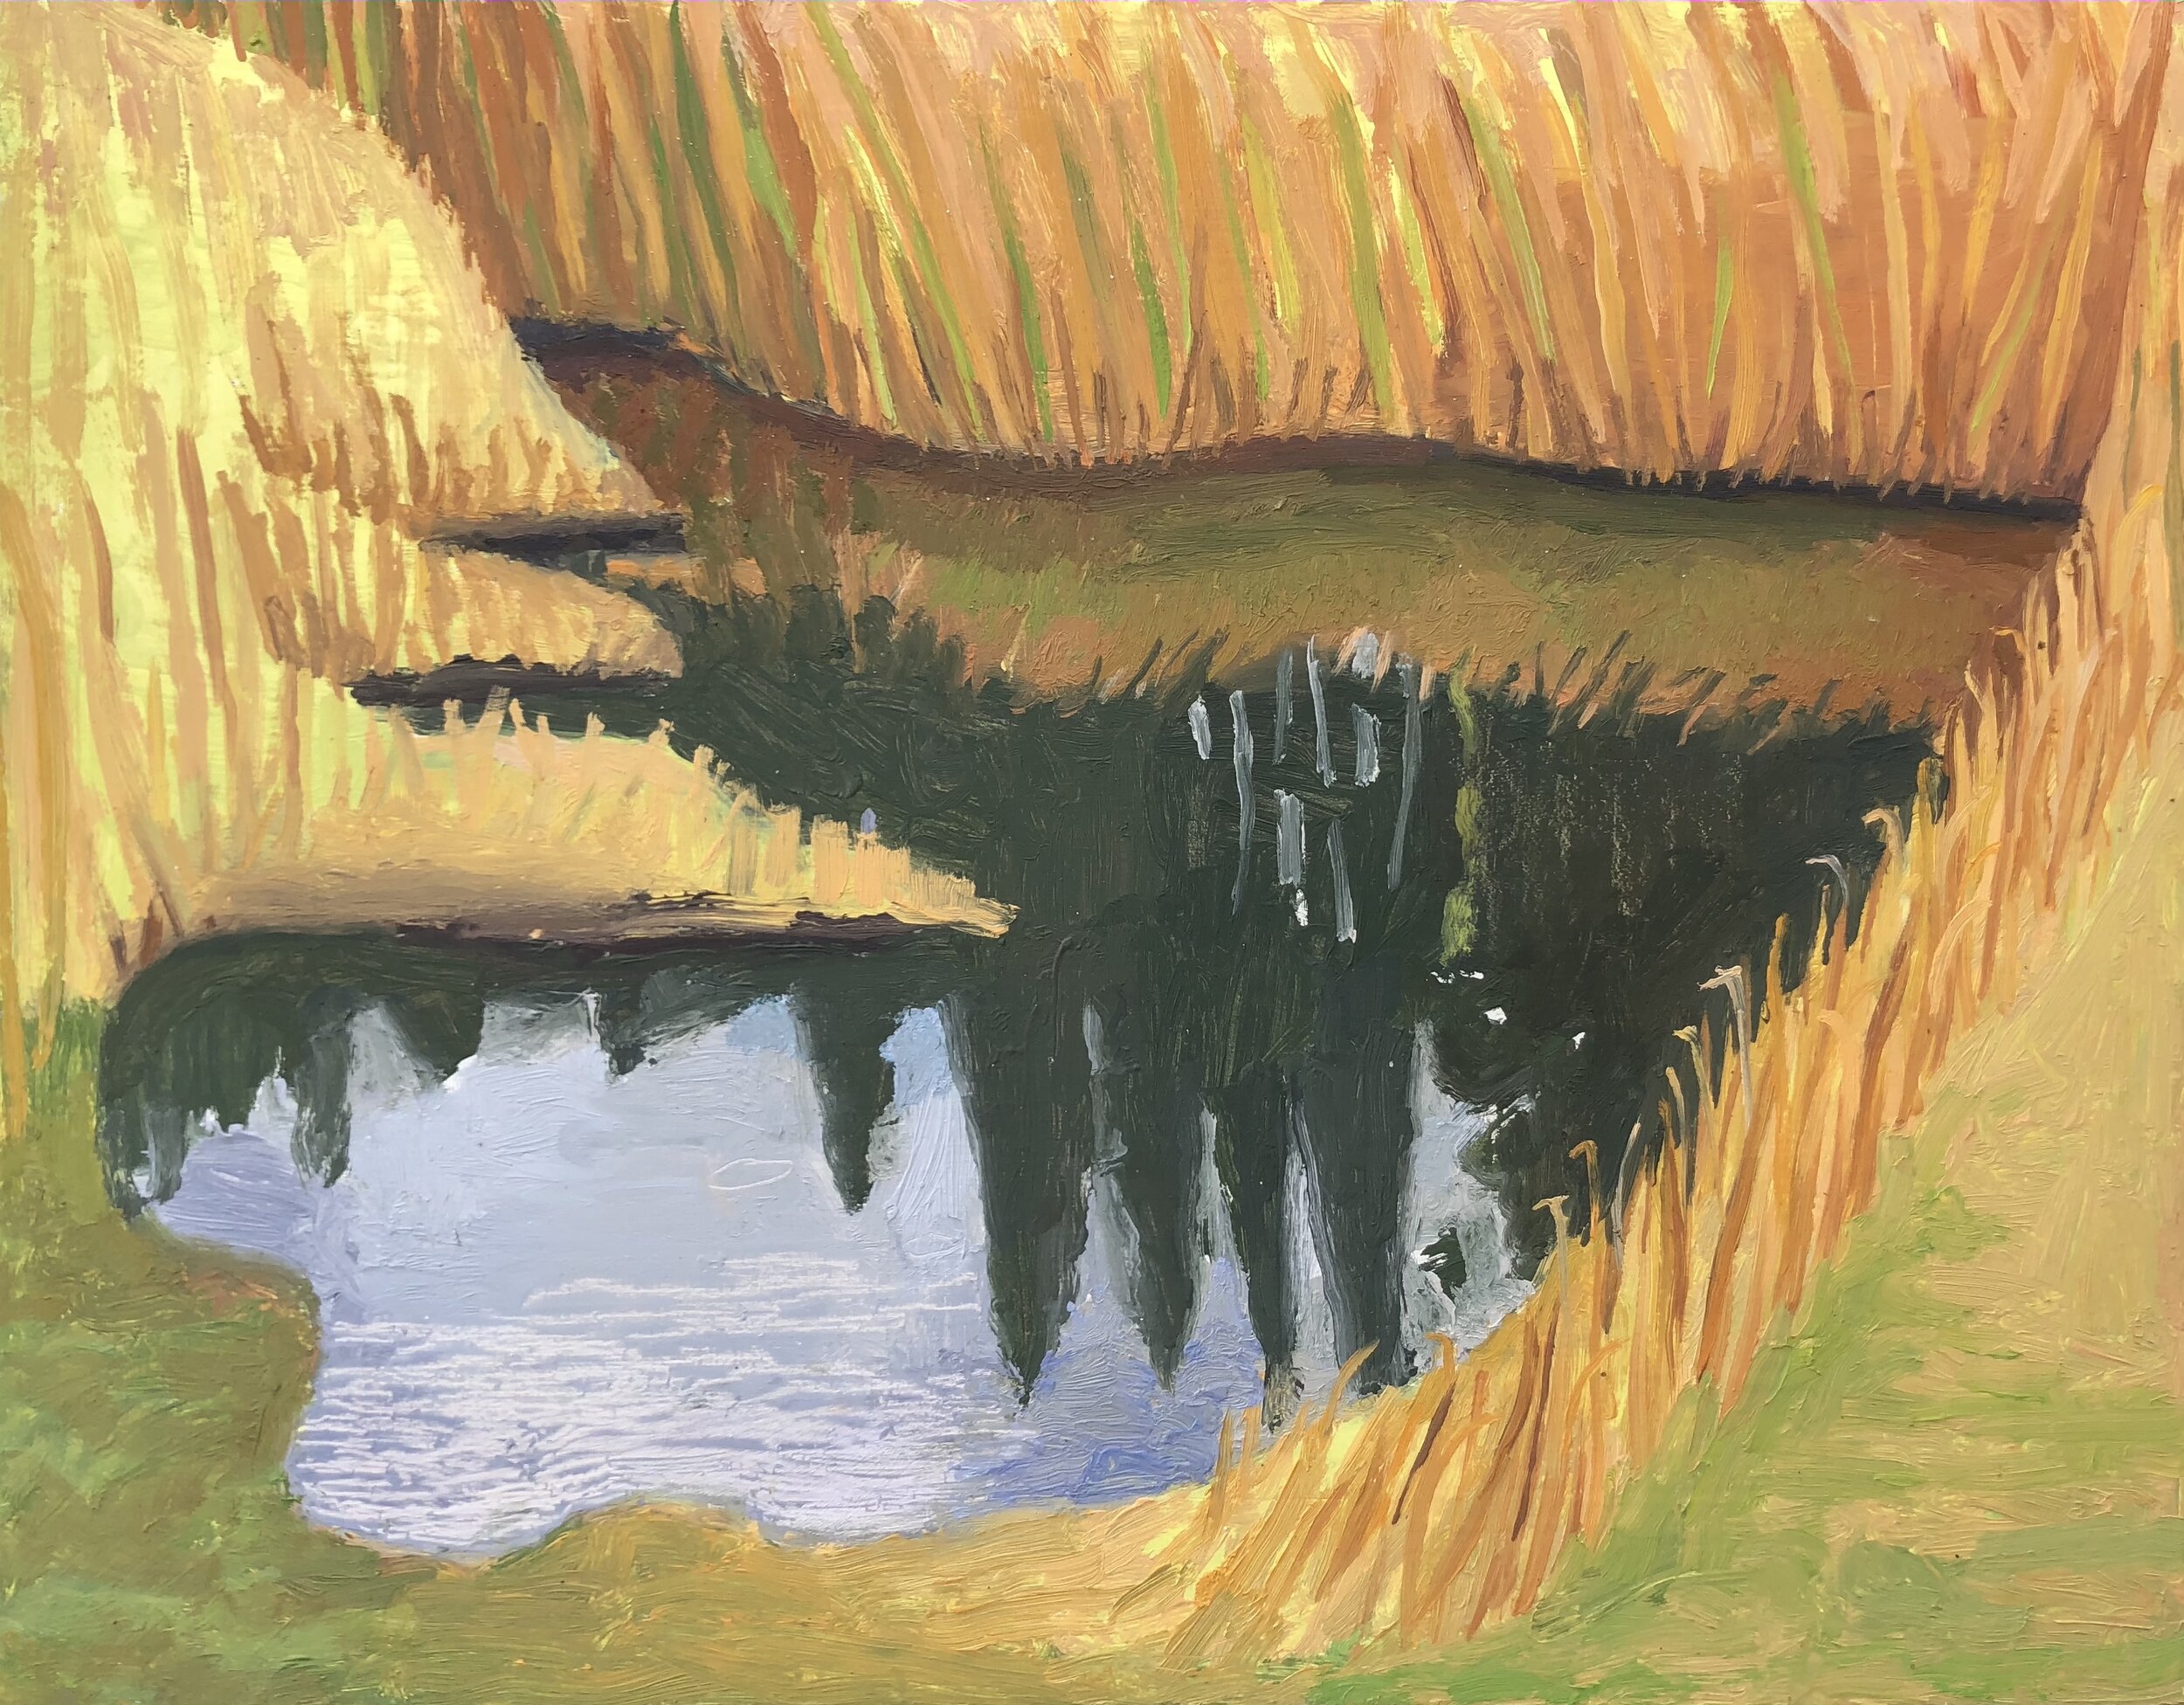  Reflection Pond, 14 x 11 inches, 2019 